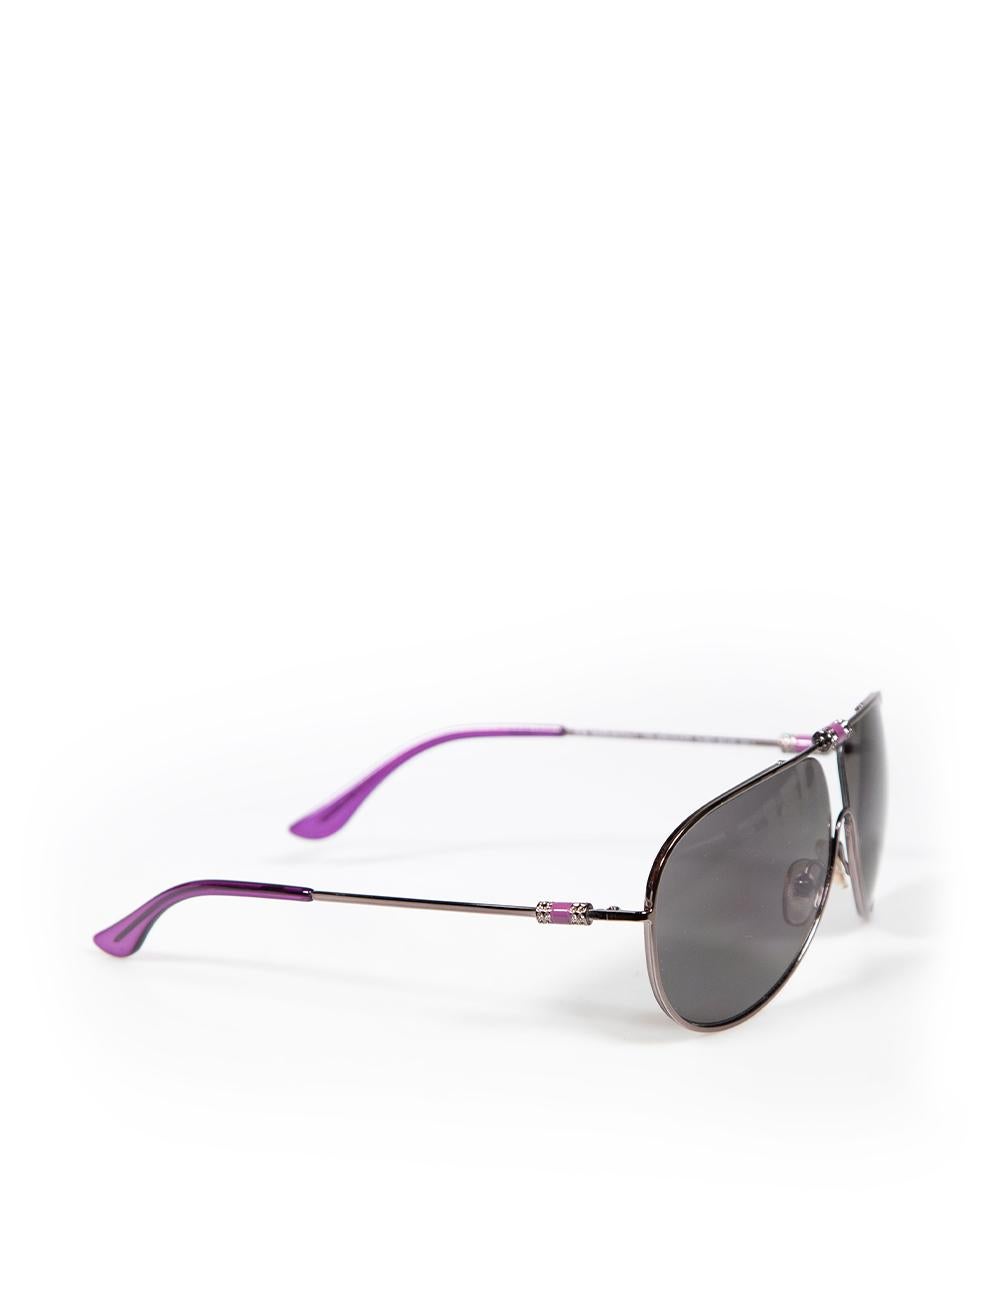 CONDITION is Very good. Hardly any visible wear to sunglasses is evident on this used Yves Saint Laurent designer resale item. This item comes with original cloth bag and box.
 
 
 
 Details
 
 
 Purple
 
 Metal
 
 Sunglasses
 
 Aviator frame
 
